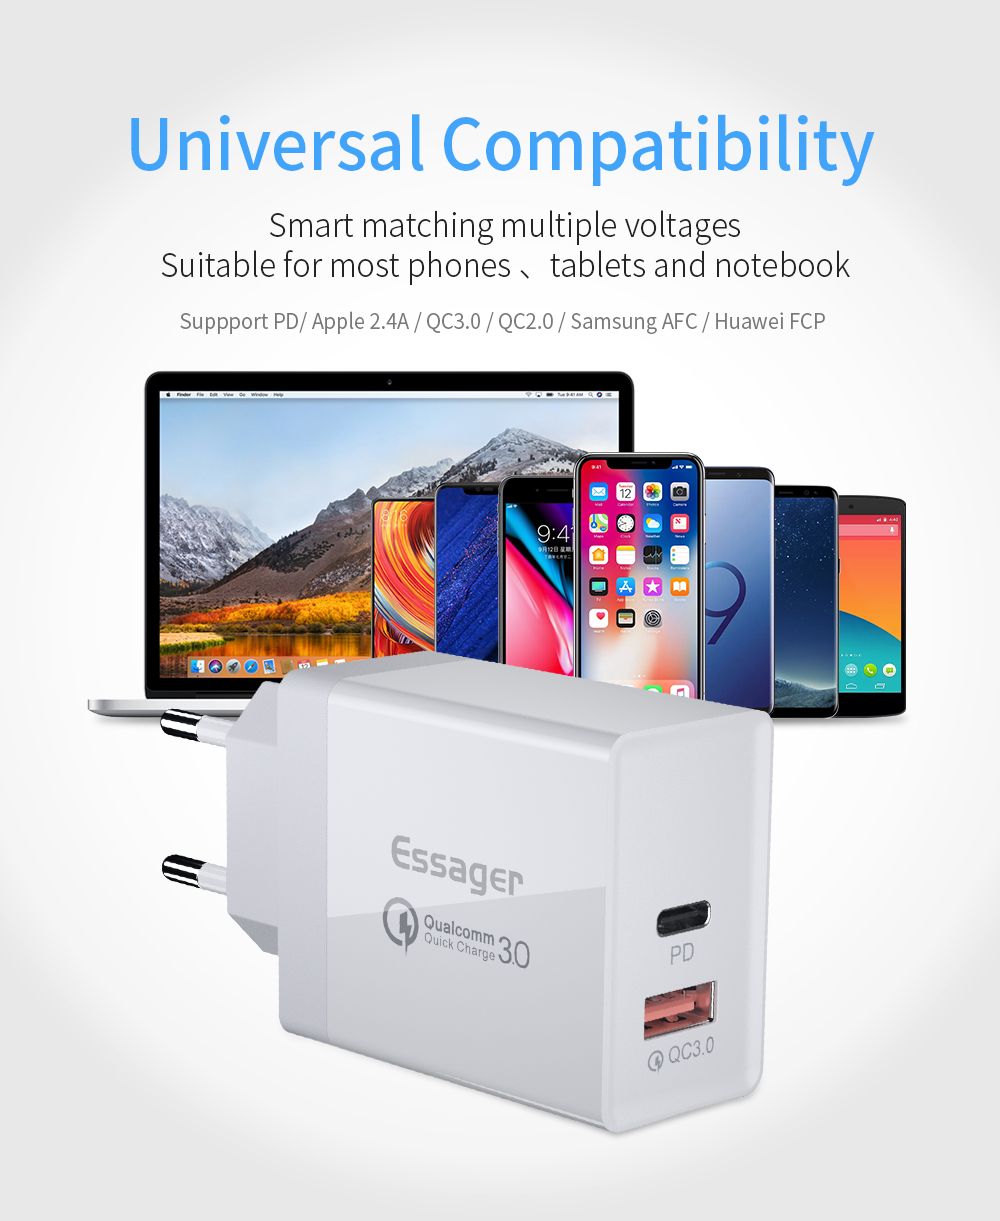 Essager-36W-Type-C-PD-Fast-Charging-Port--USB-QC30-Quick-Charging-Dual-Port-Charger-EU-Plug-Adapter--1500242